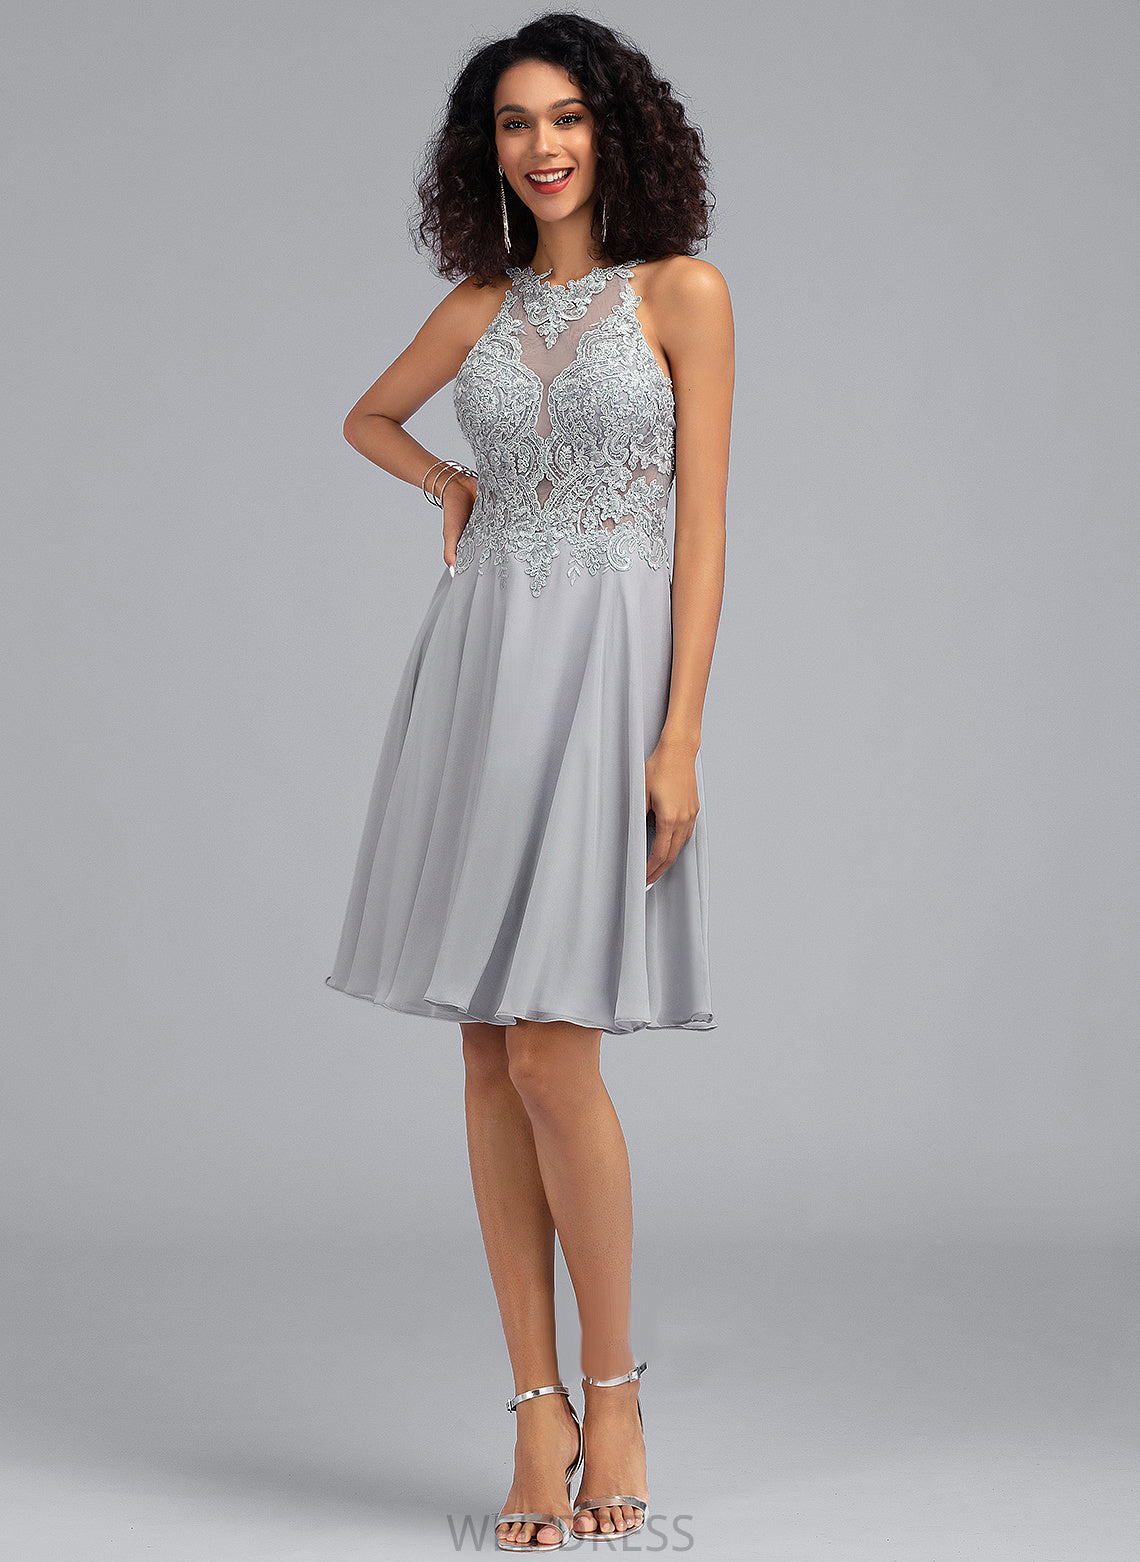 With Chiffon Sequins Knee-Length Neck Prom Dresses Moriah Scoop A-Line